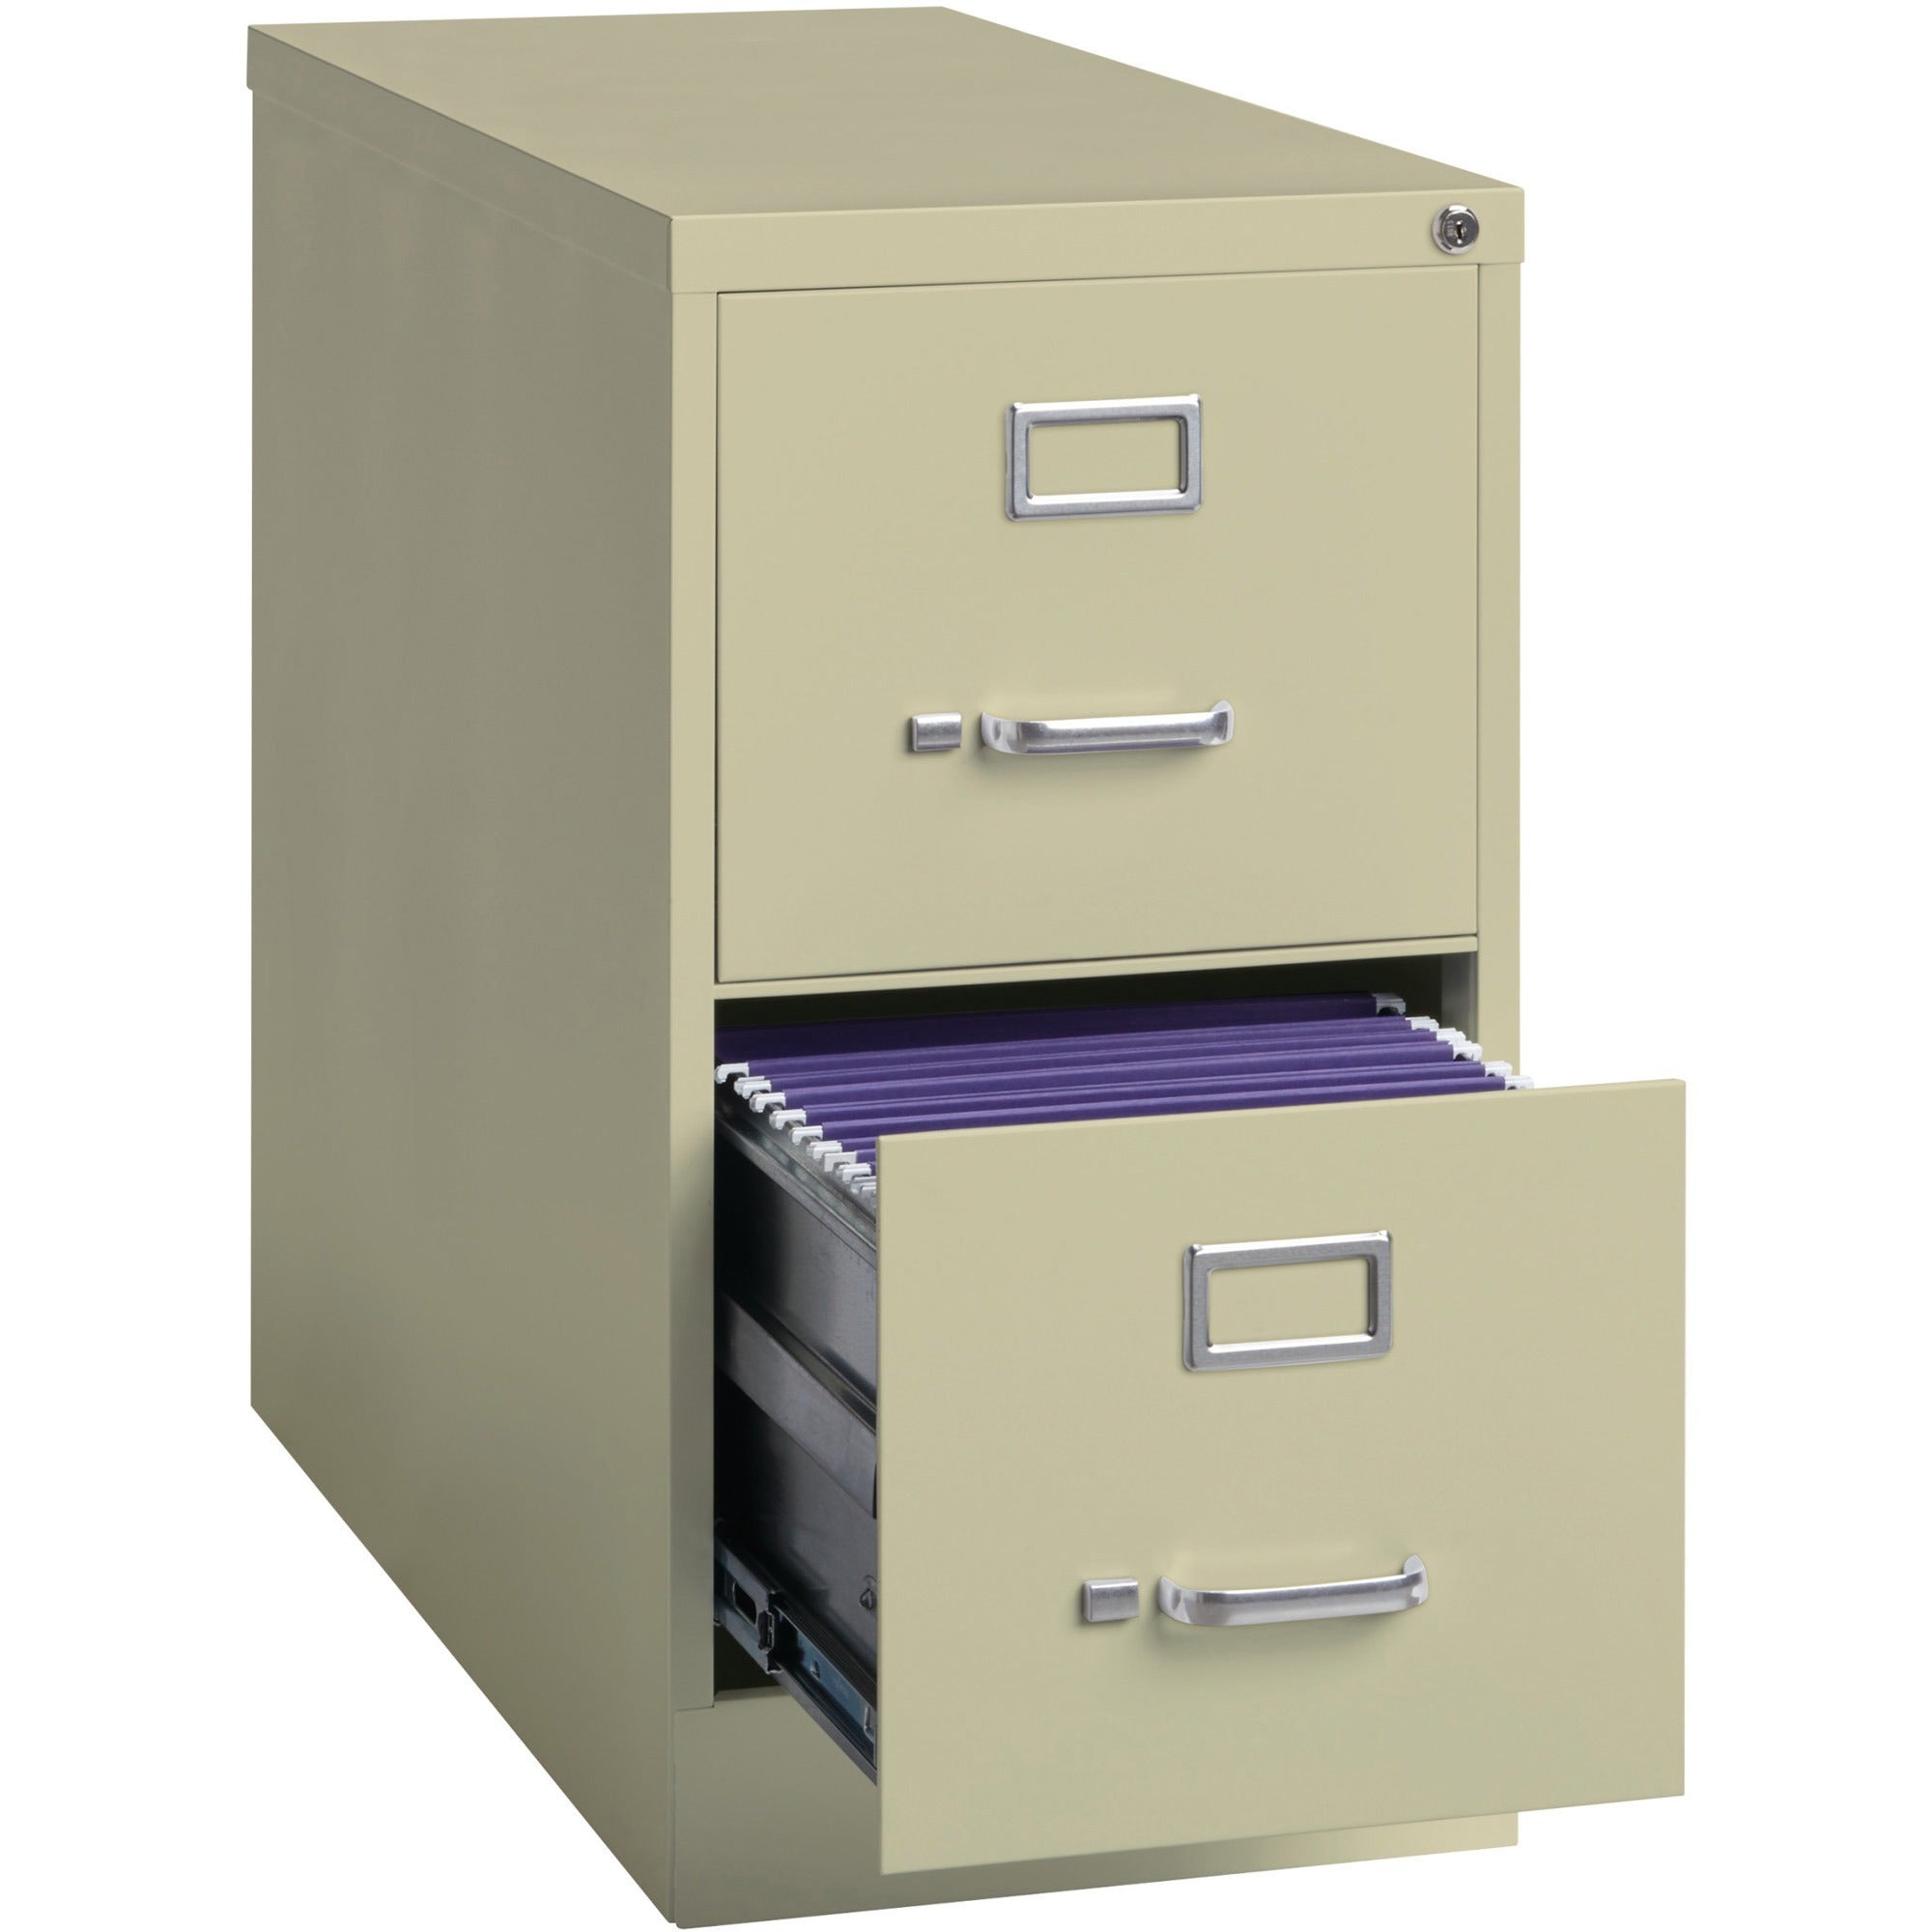 Lorell Fortress Series 26-1/2" Commercial-Grade Vertical File Cabinet - 15" x 26.5" x 28.4" - 2 x Drawer(s) for File - Letter - Vertical - Security Lock, Ball-bearing Suspension, Heavy Duty - Putty - Steel - Recycled - 